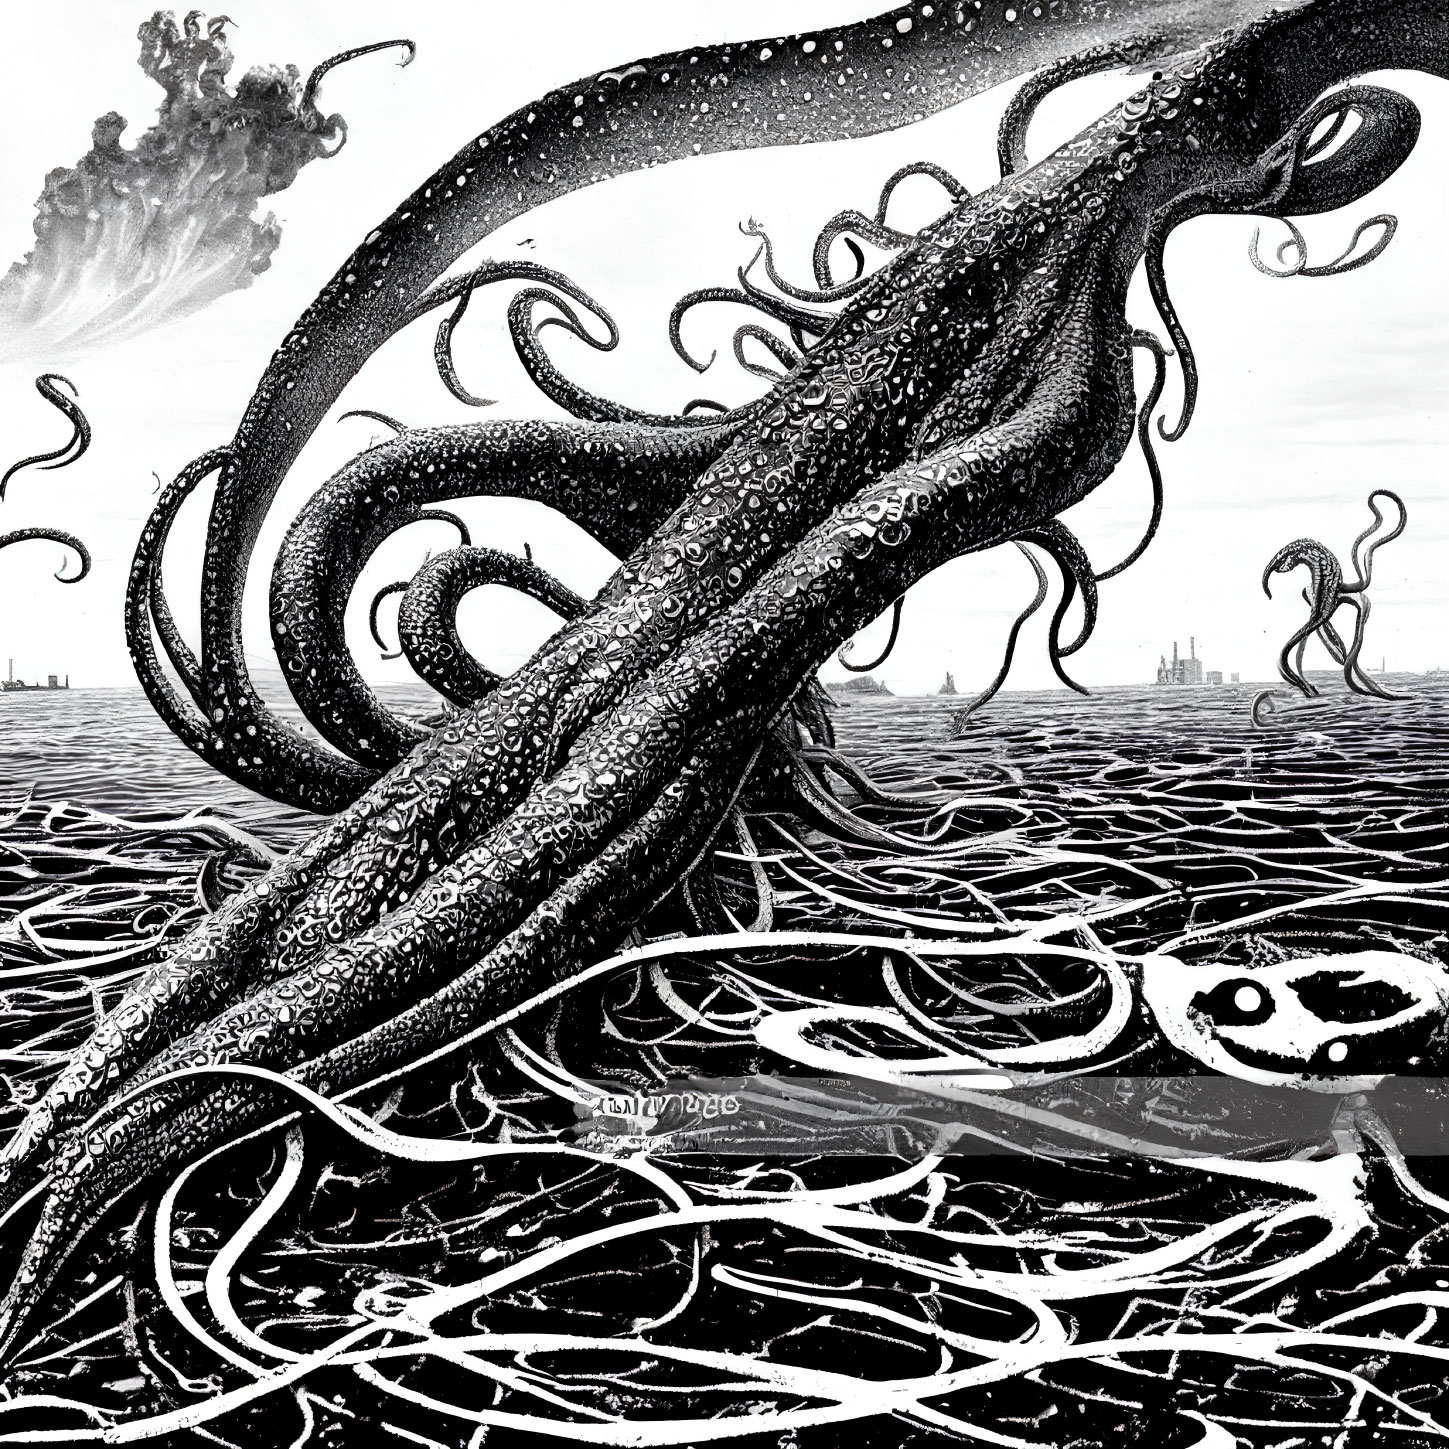 Monochrome illustration of giant octopus in industrial cityscape.